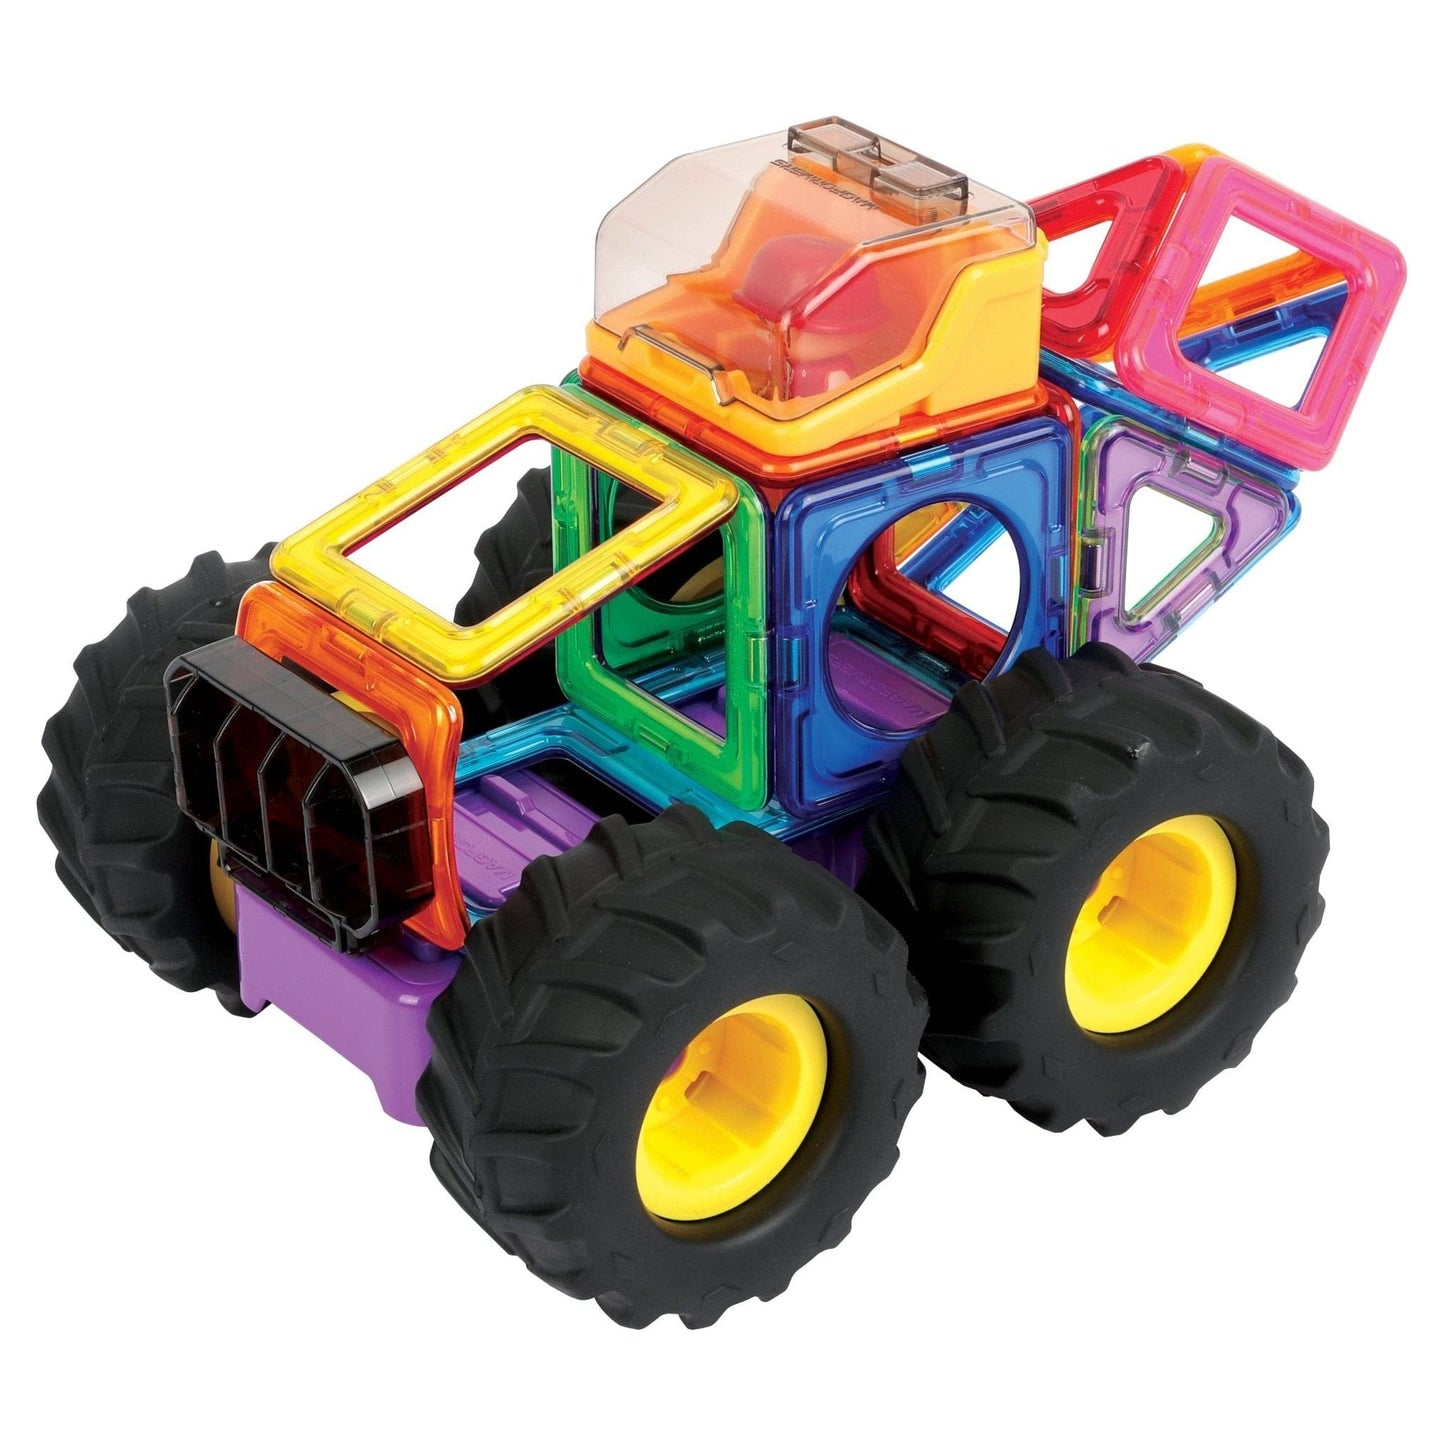 4x4 car shape made from Magformers Construction Toy Giant Wheel Set